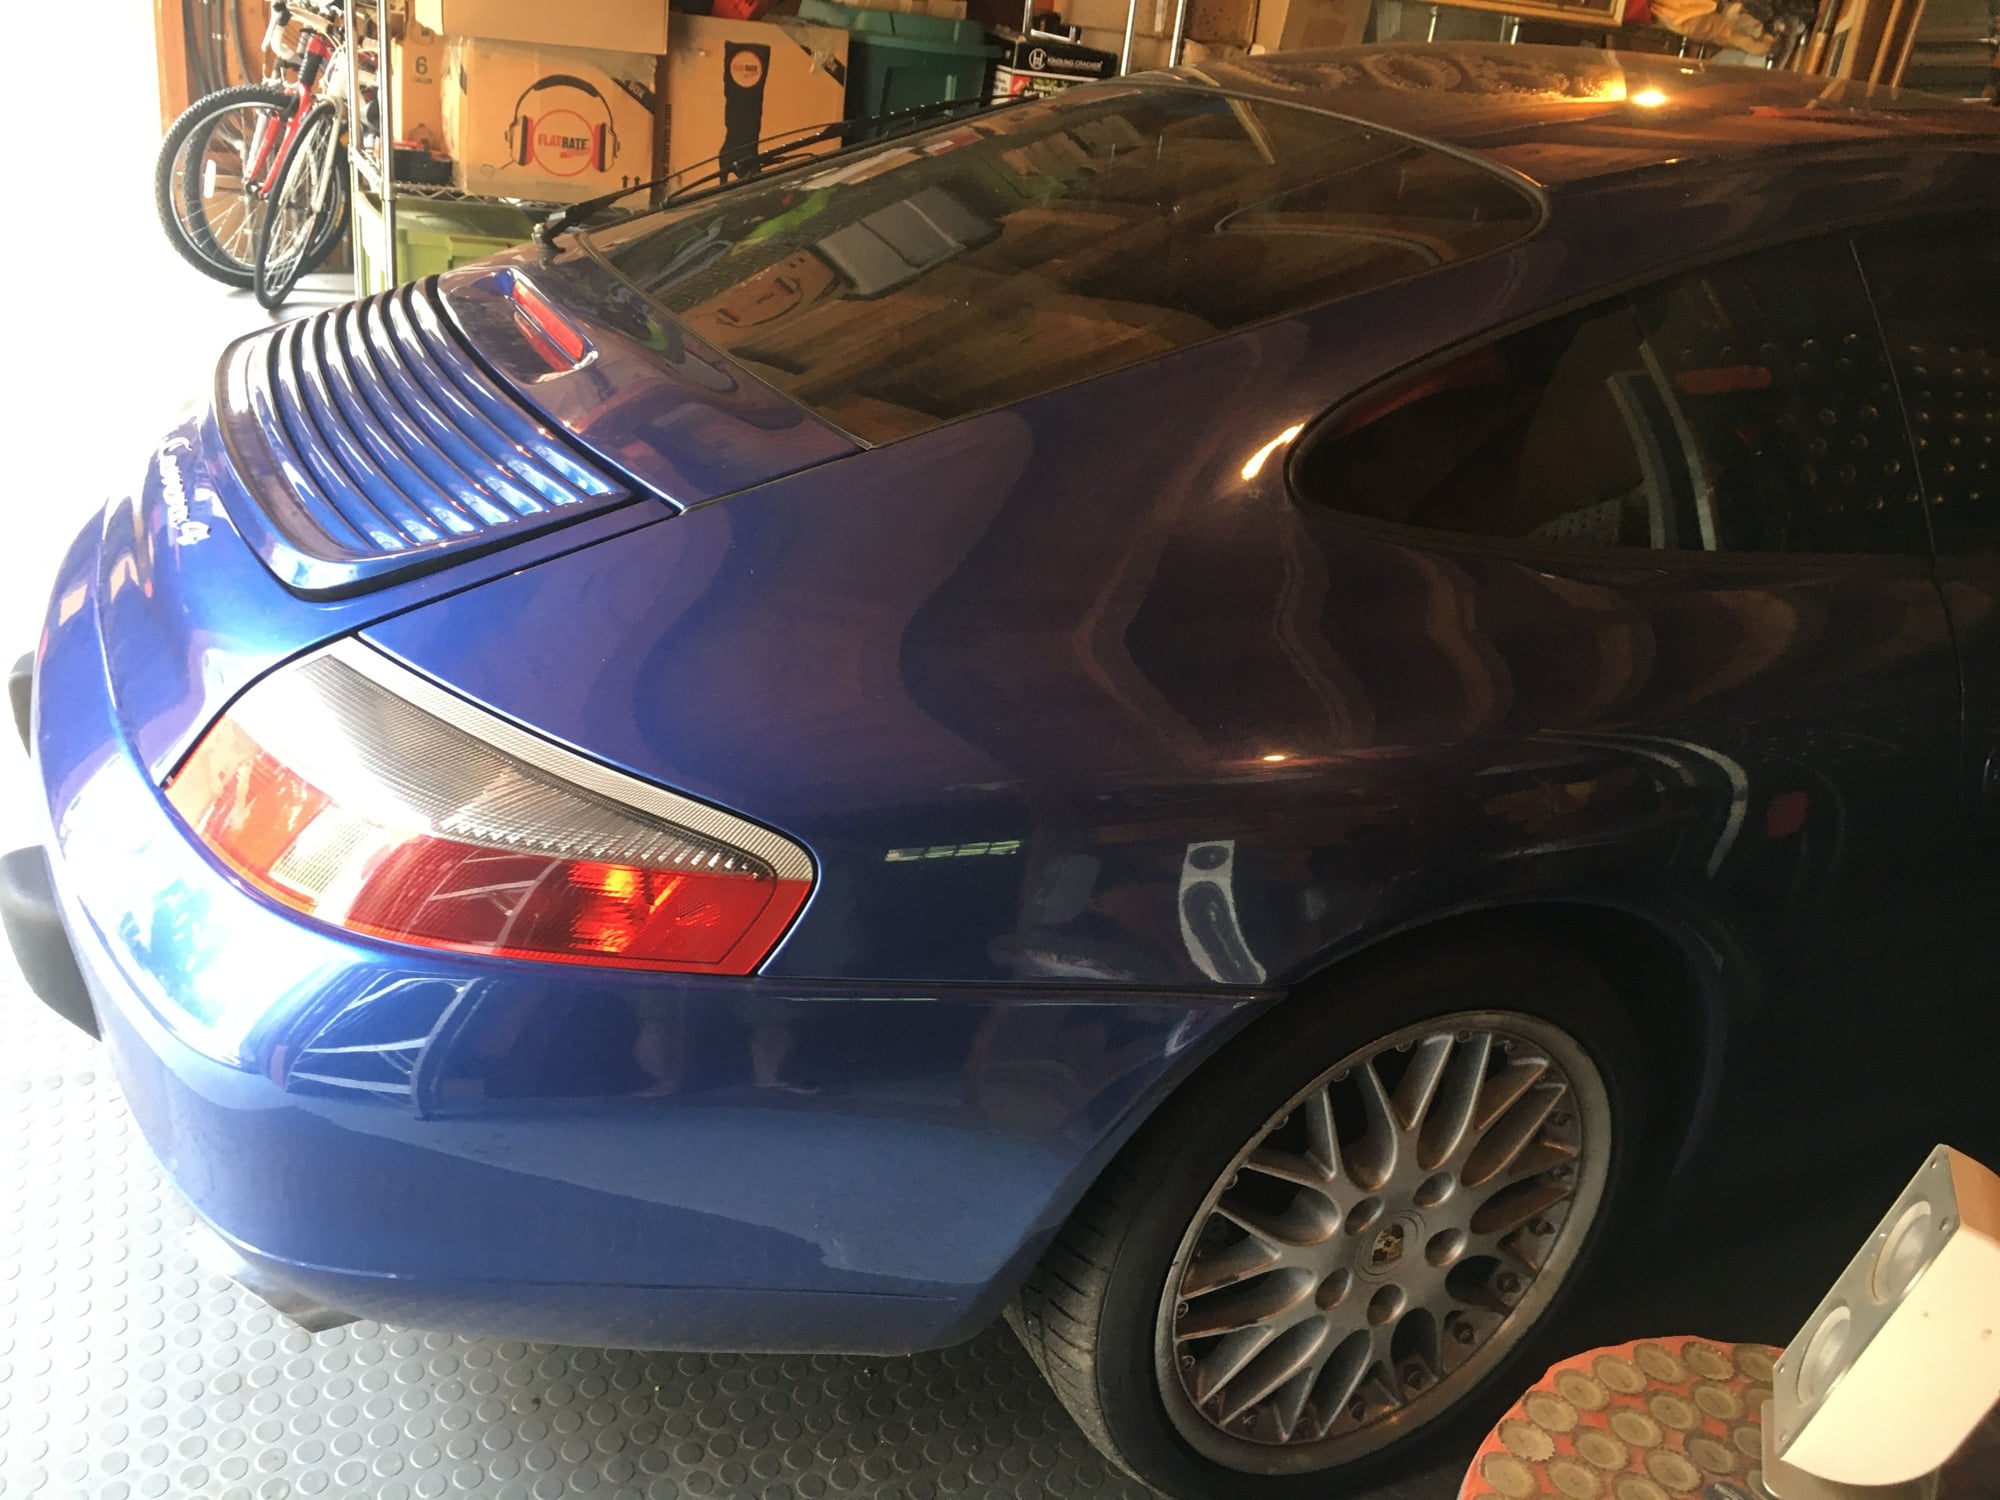 2001 Porsche 911 - 2001 996 Carrera 4  - Project Car    NOT A SALVAGE - Used - VIN wpoaa299x1s622240 - 77,500 Miles - 6 cyl - 4WD - Manual - Coupe - Blue - Sherman, CT 06784, United States